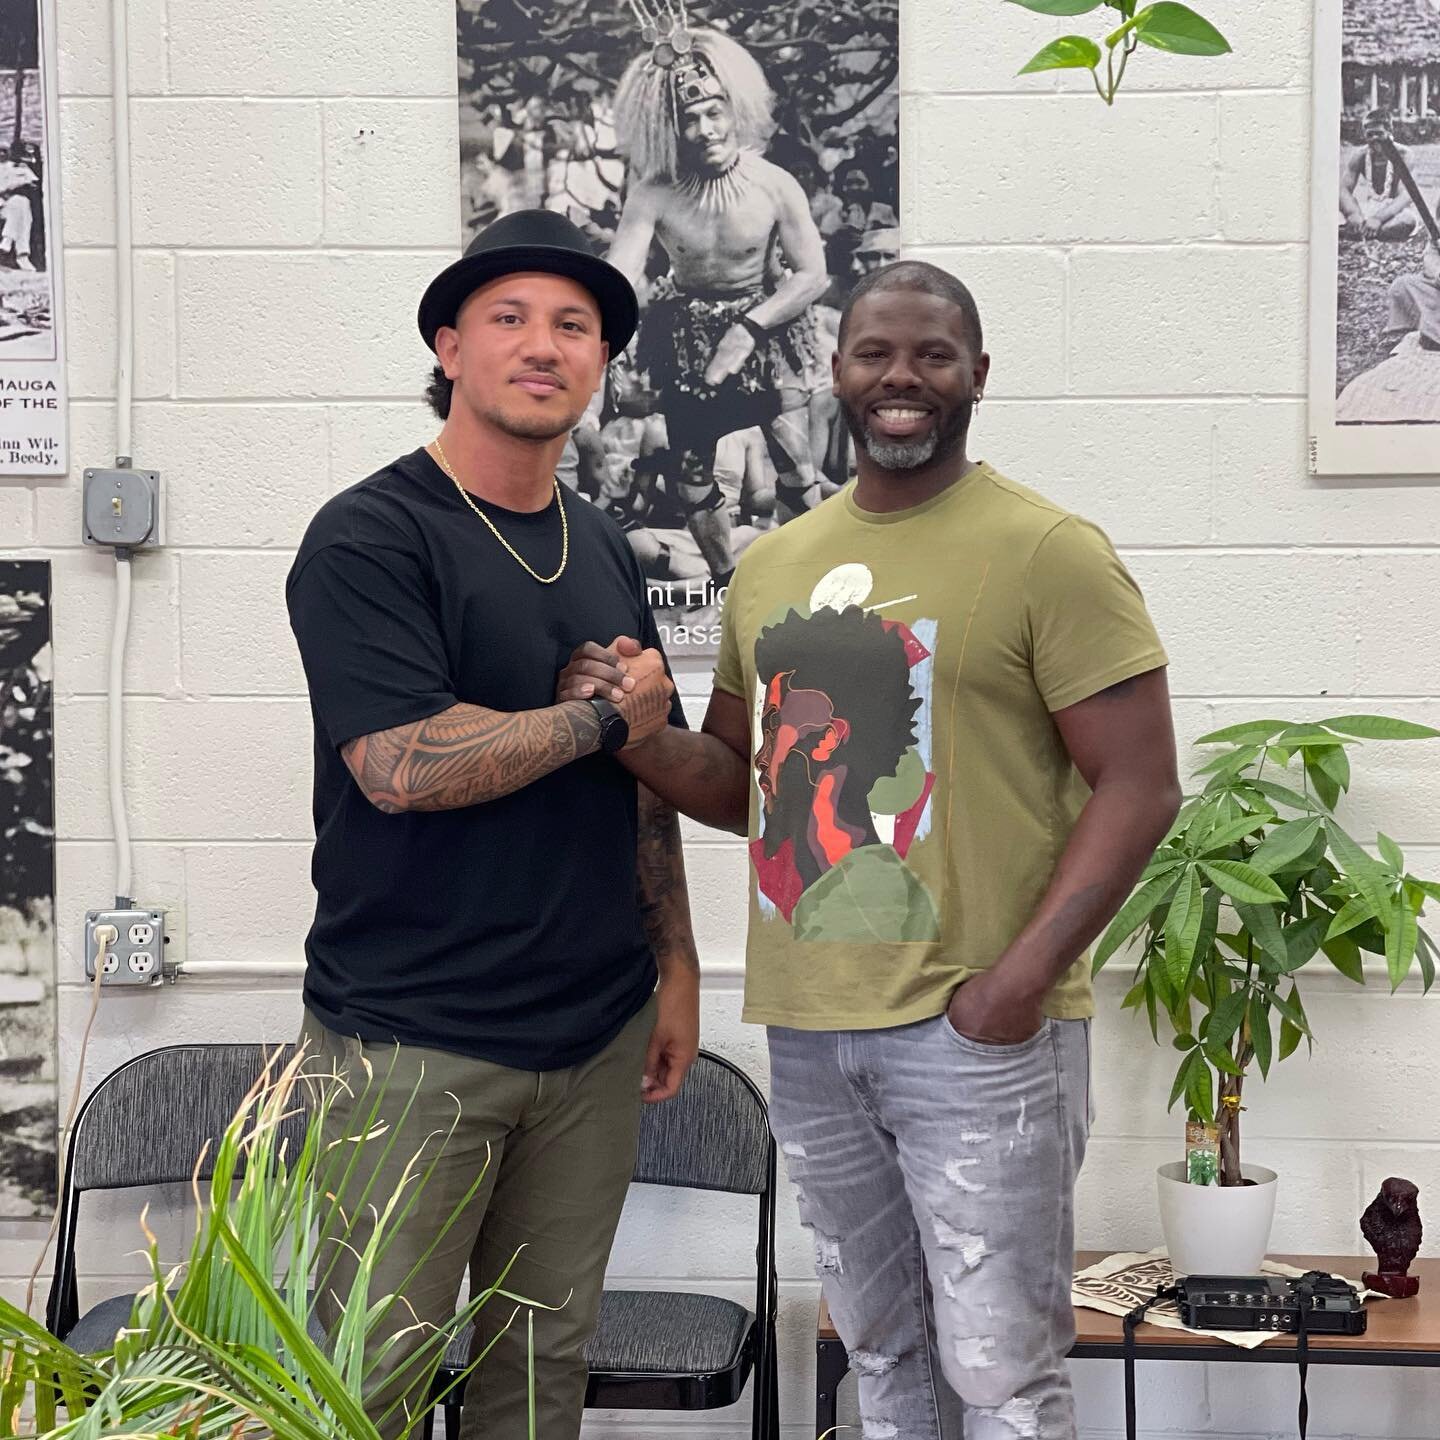 Spent time today with @uso_fresh owner of @artisan_kings_barbershop. It was a honor interviewing him stay tuned for more content @lets_talk_about_it_podcast2022 ! Full interview coming out soon! 

🎥 @templeofzen 
.
#barberpodcast